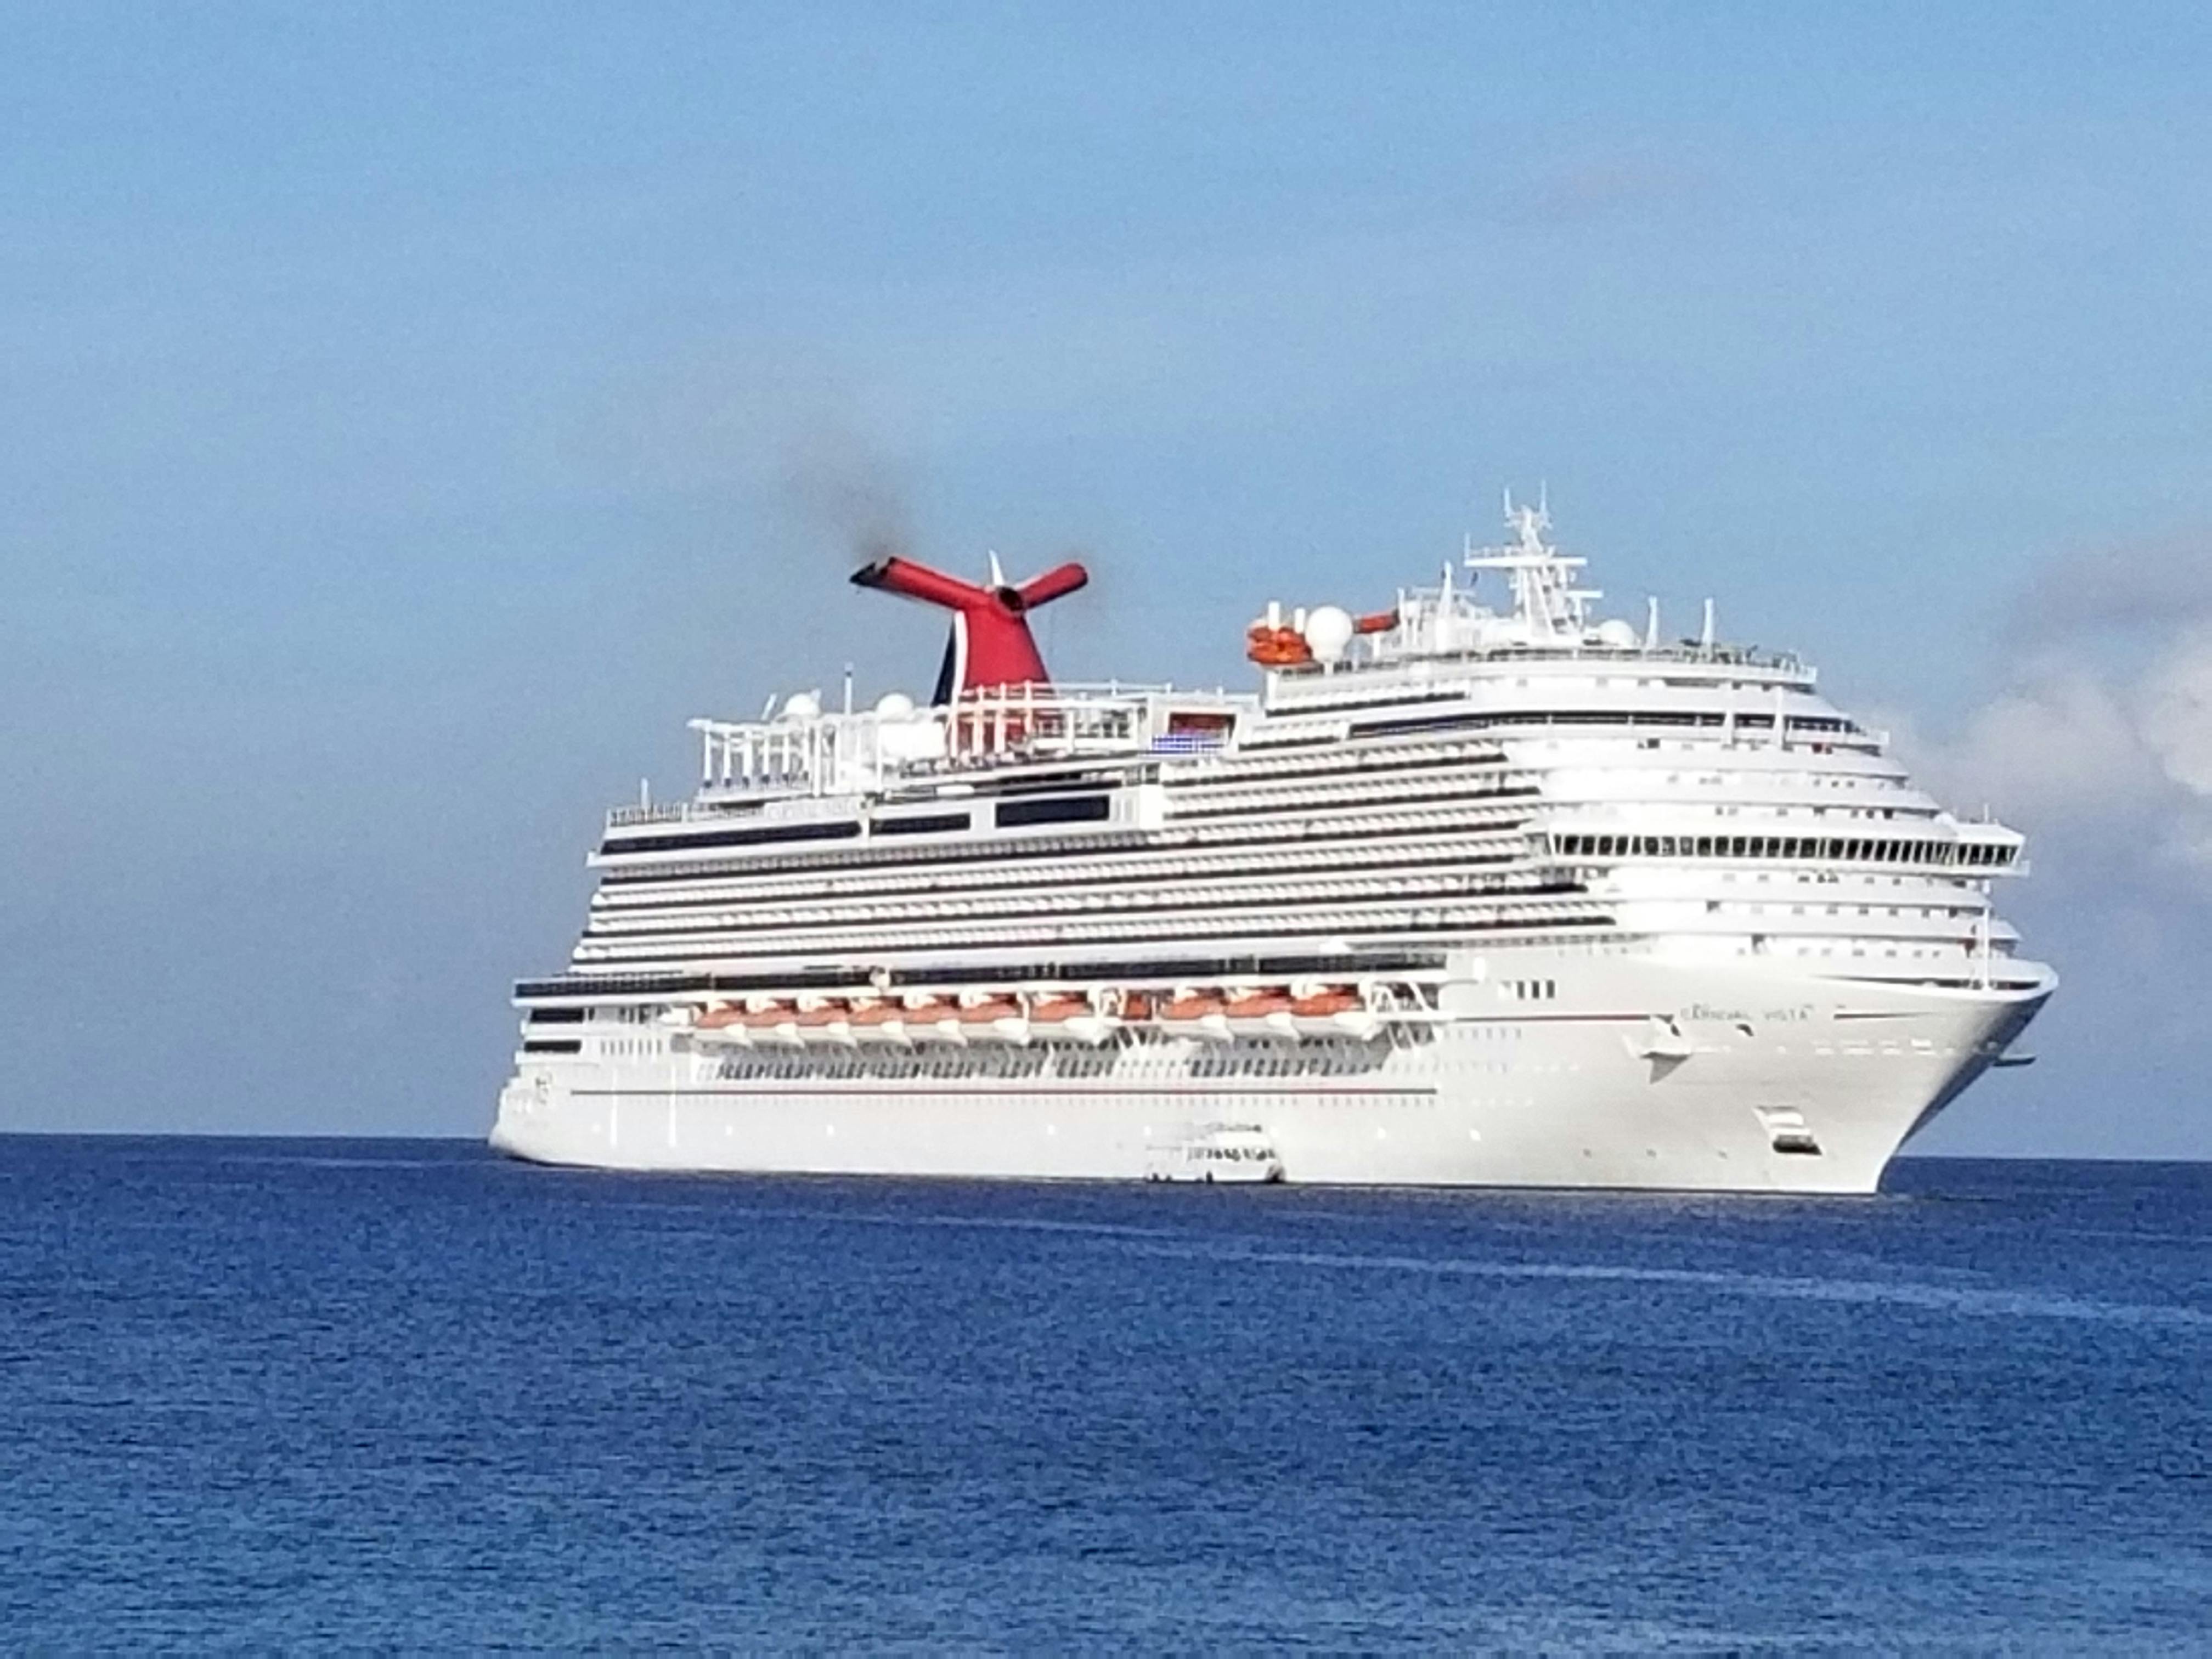 Carnival Vista Cruise Review by tsmith1017 October 15, 2017